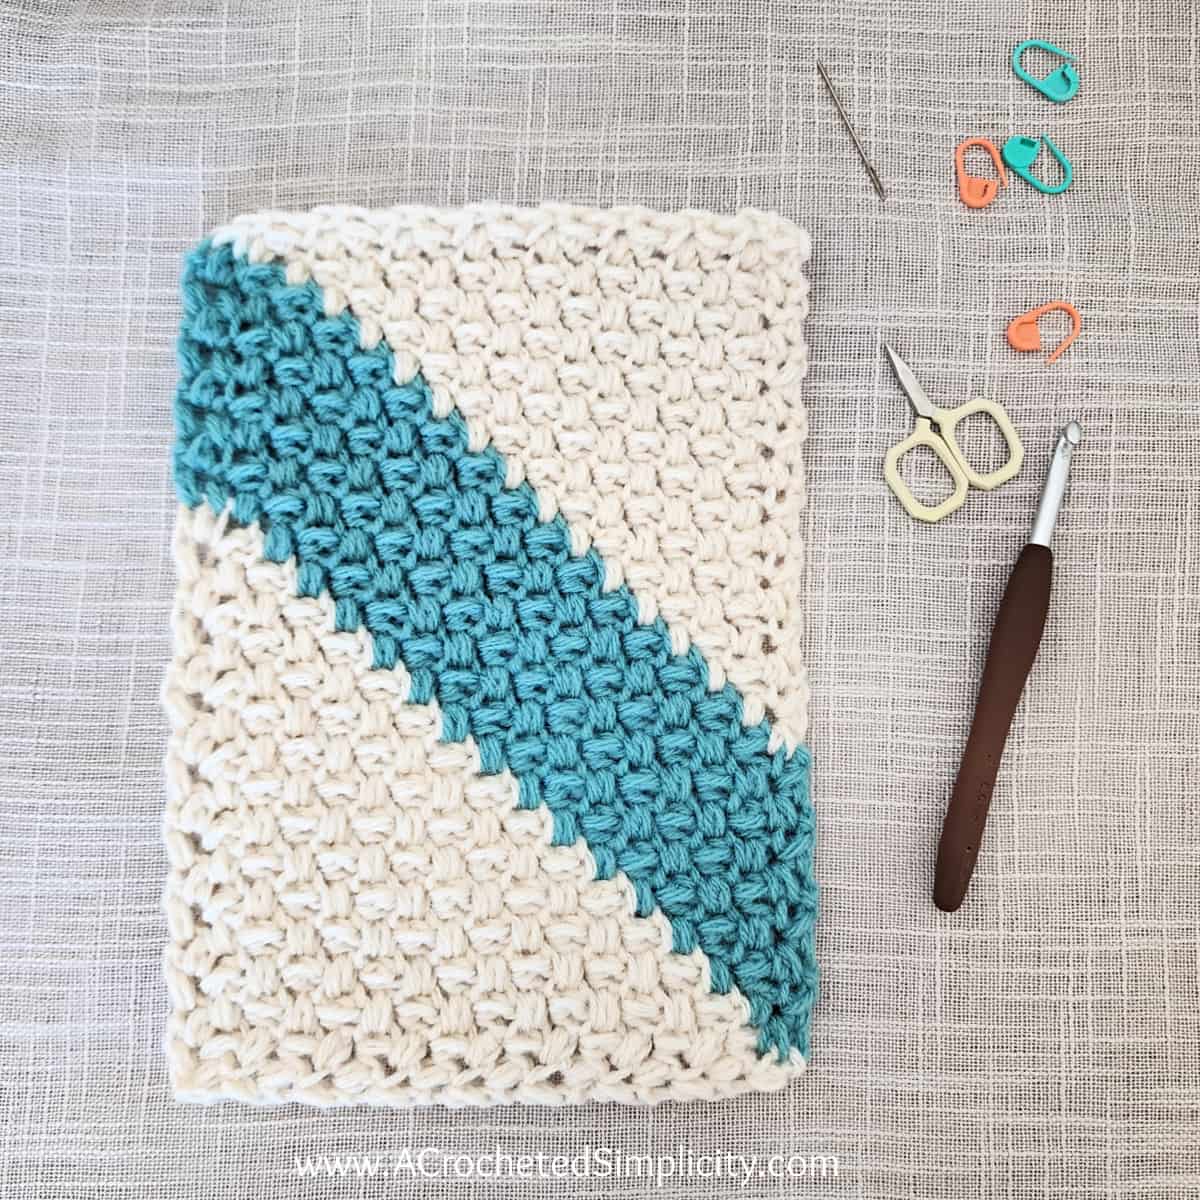 Image is of a c2c rectangle crocheted using the mini bean stitch